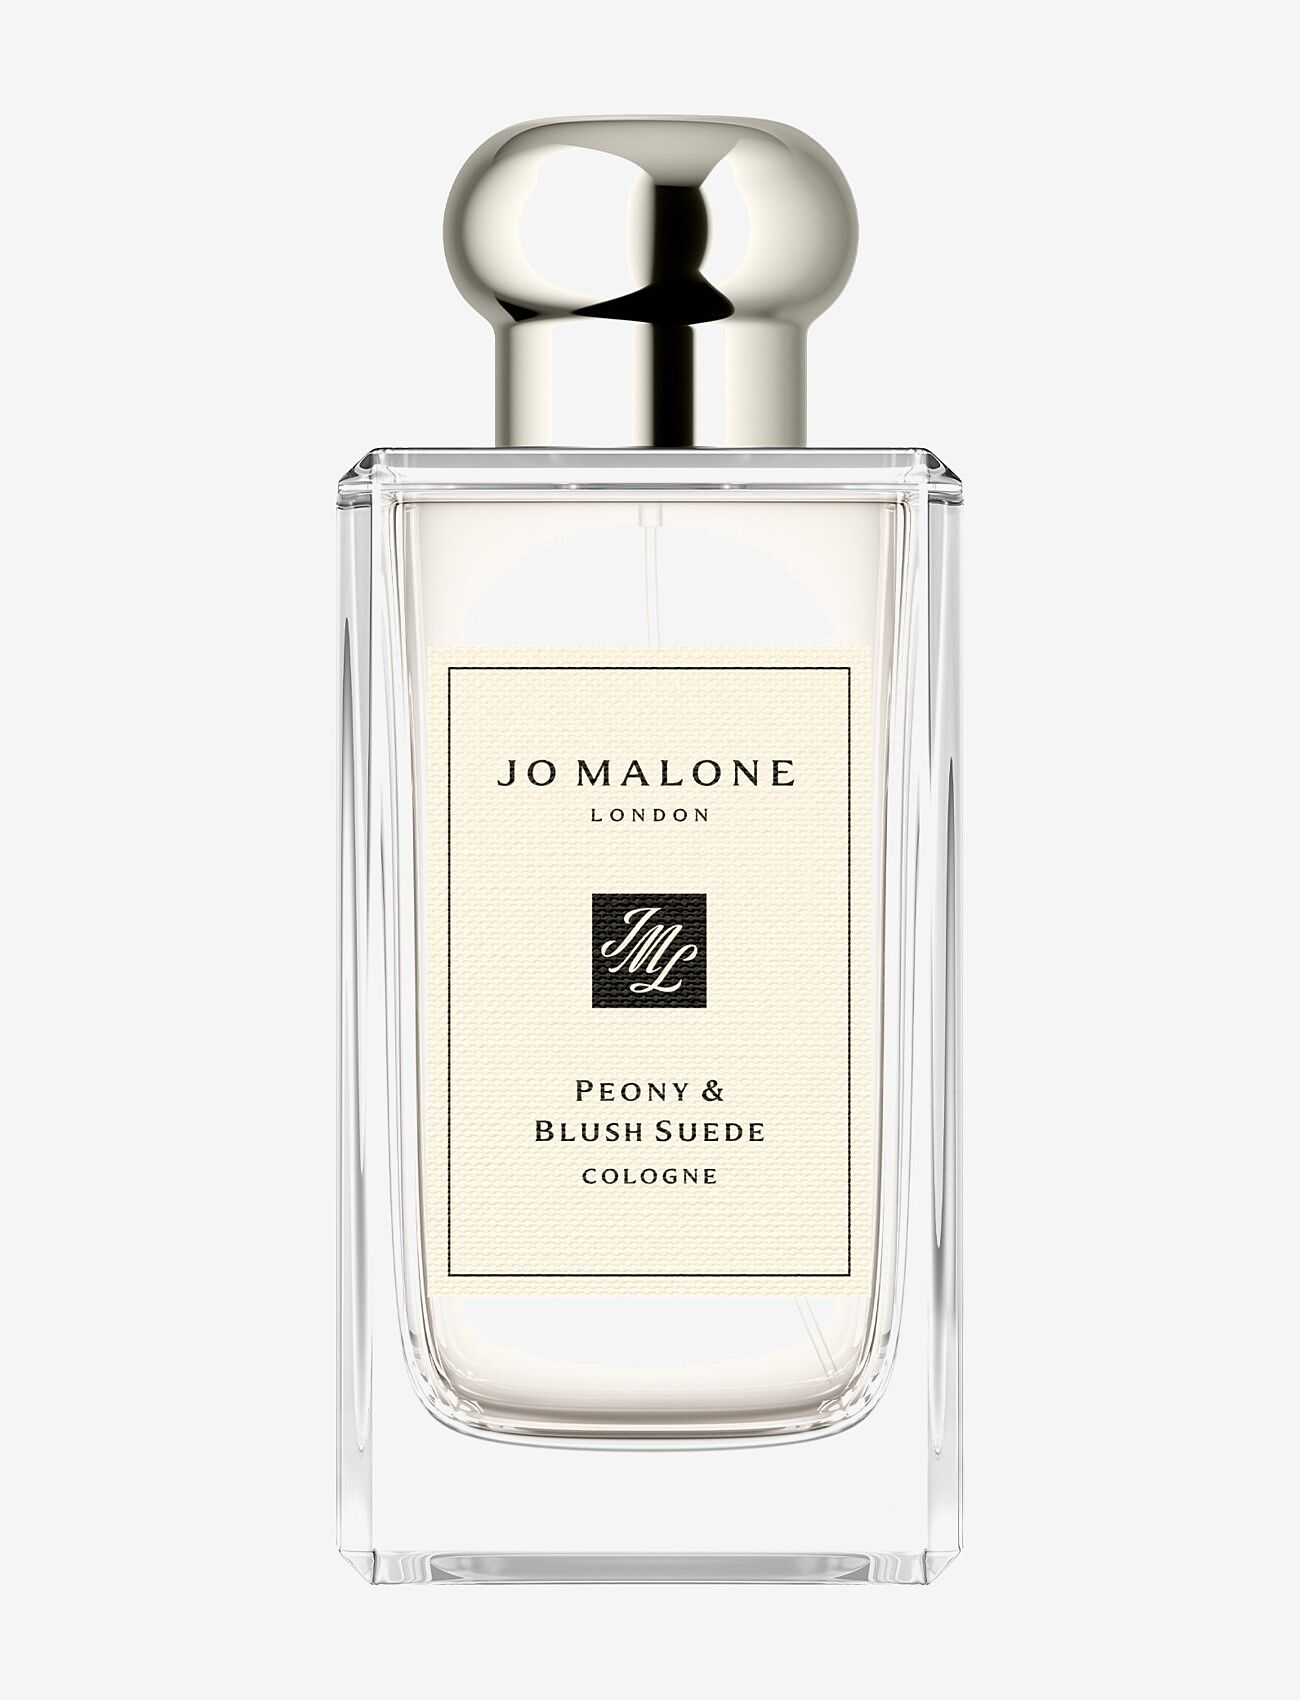 Jo Malone London Peony & Blush Suede Cologne 100ml (Clear) - 1265 kr